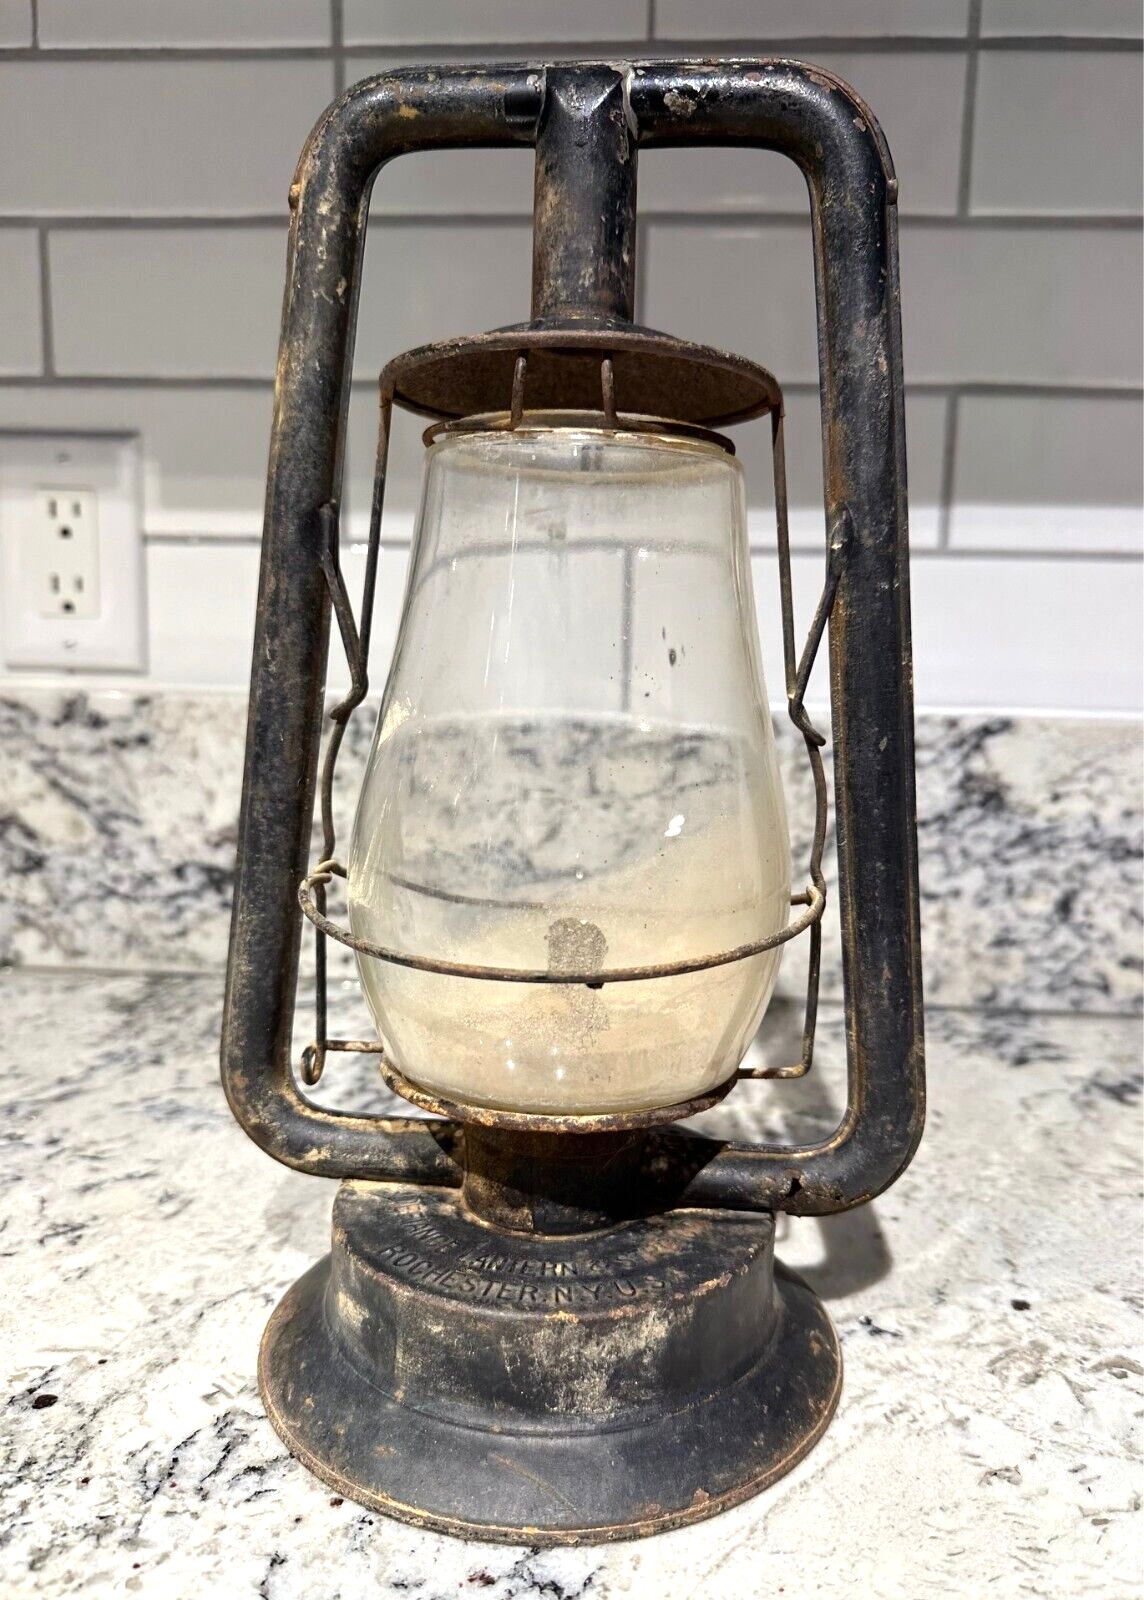 DEFIANCE Rochester, NY Vintage No.0 Perfection Survivor Lantern Made in USA